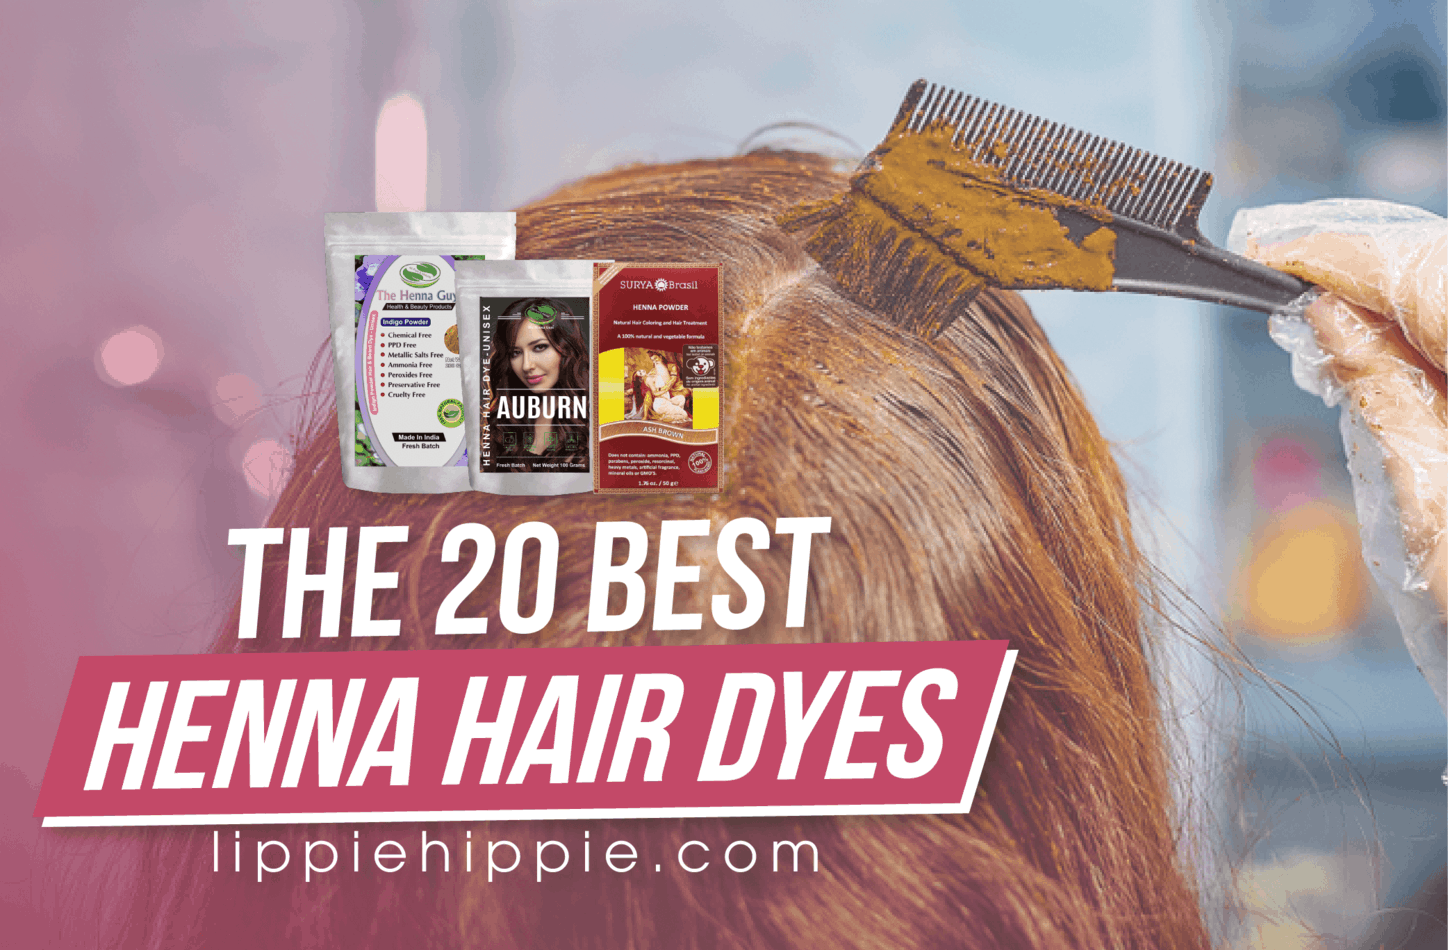 10. Reviews of Blue Hair Dye Products That Have Turned Green - wide 5